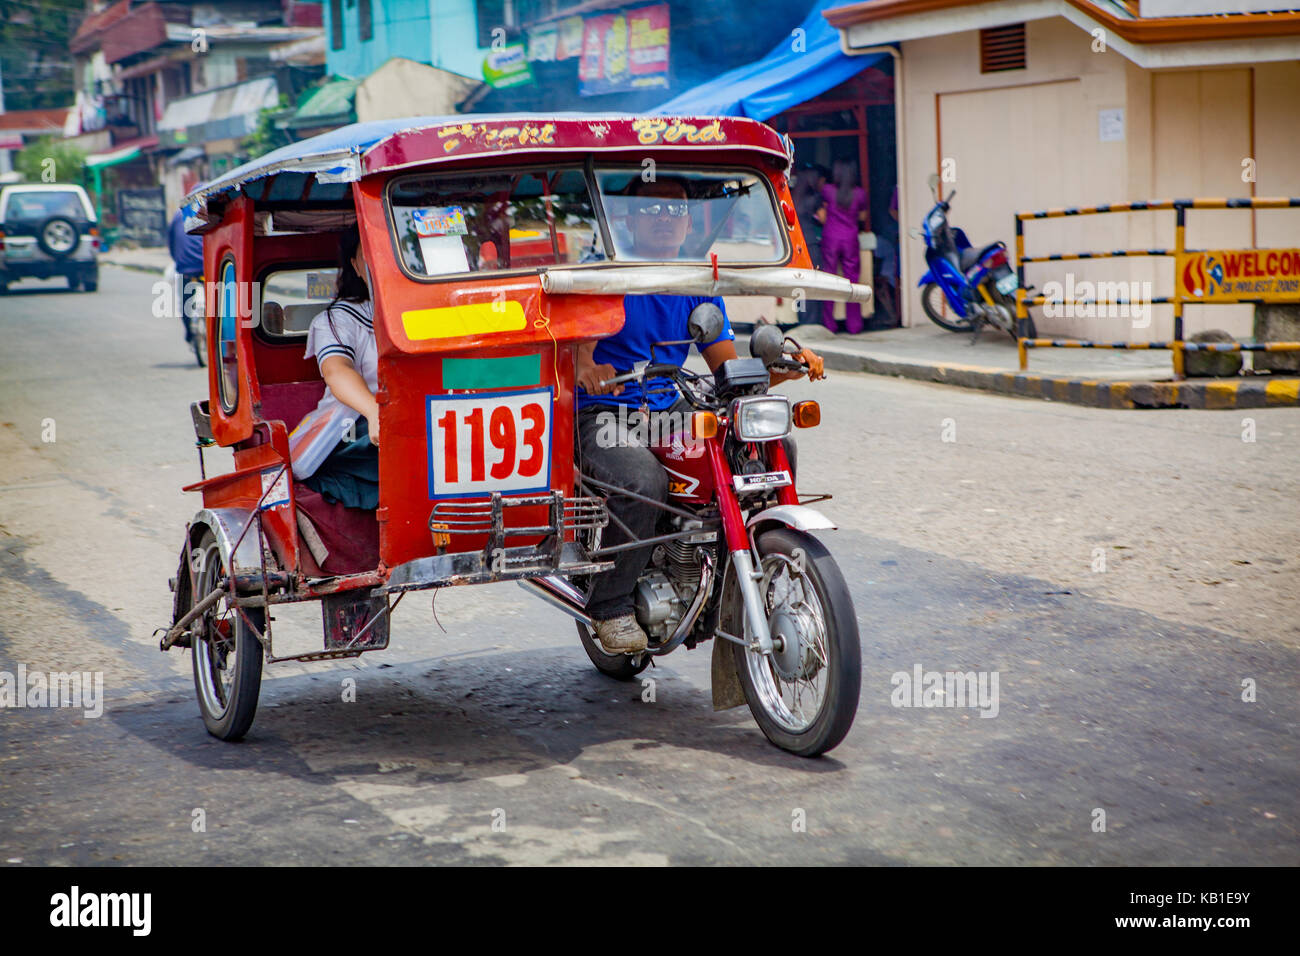 Sidecar attached to a motorcycle called a 'trike' are the most common form of cheap, public transportation in the Philippines. Stock Photo